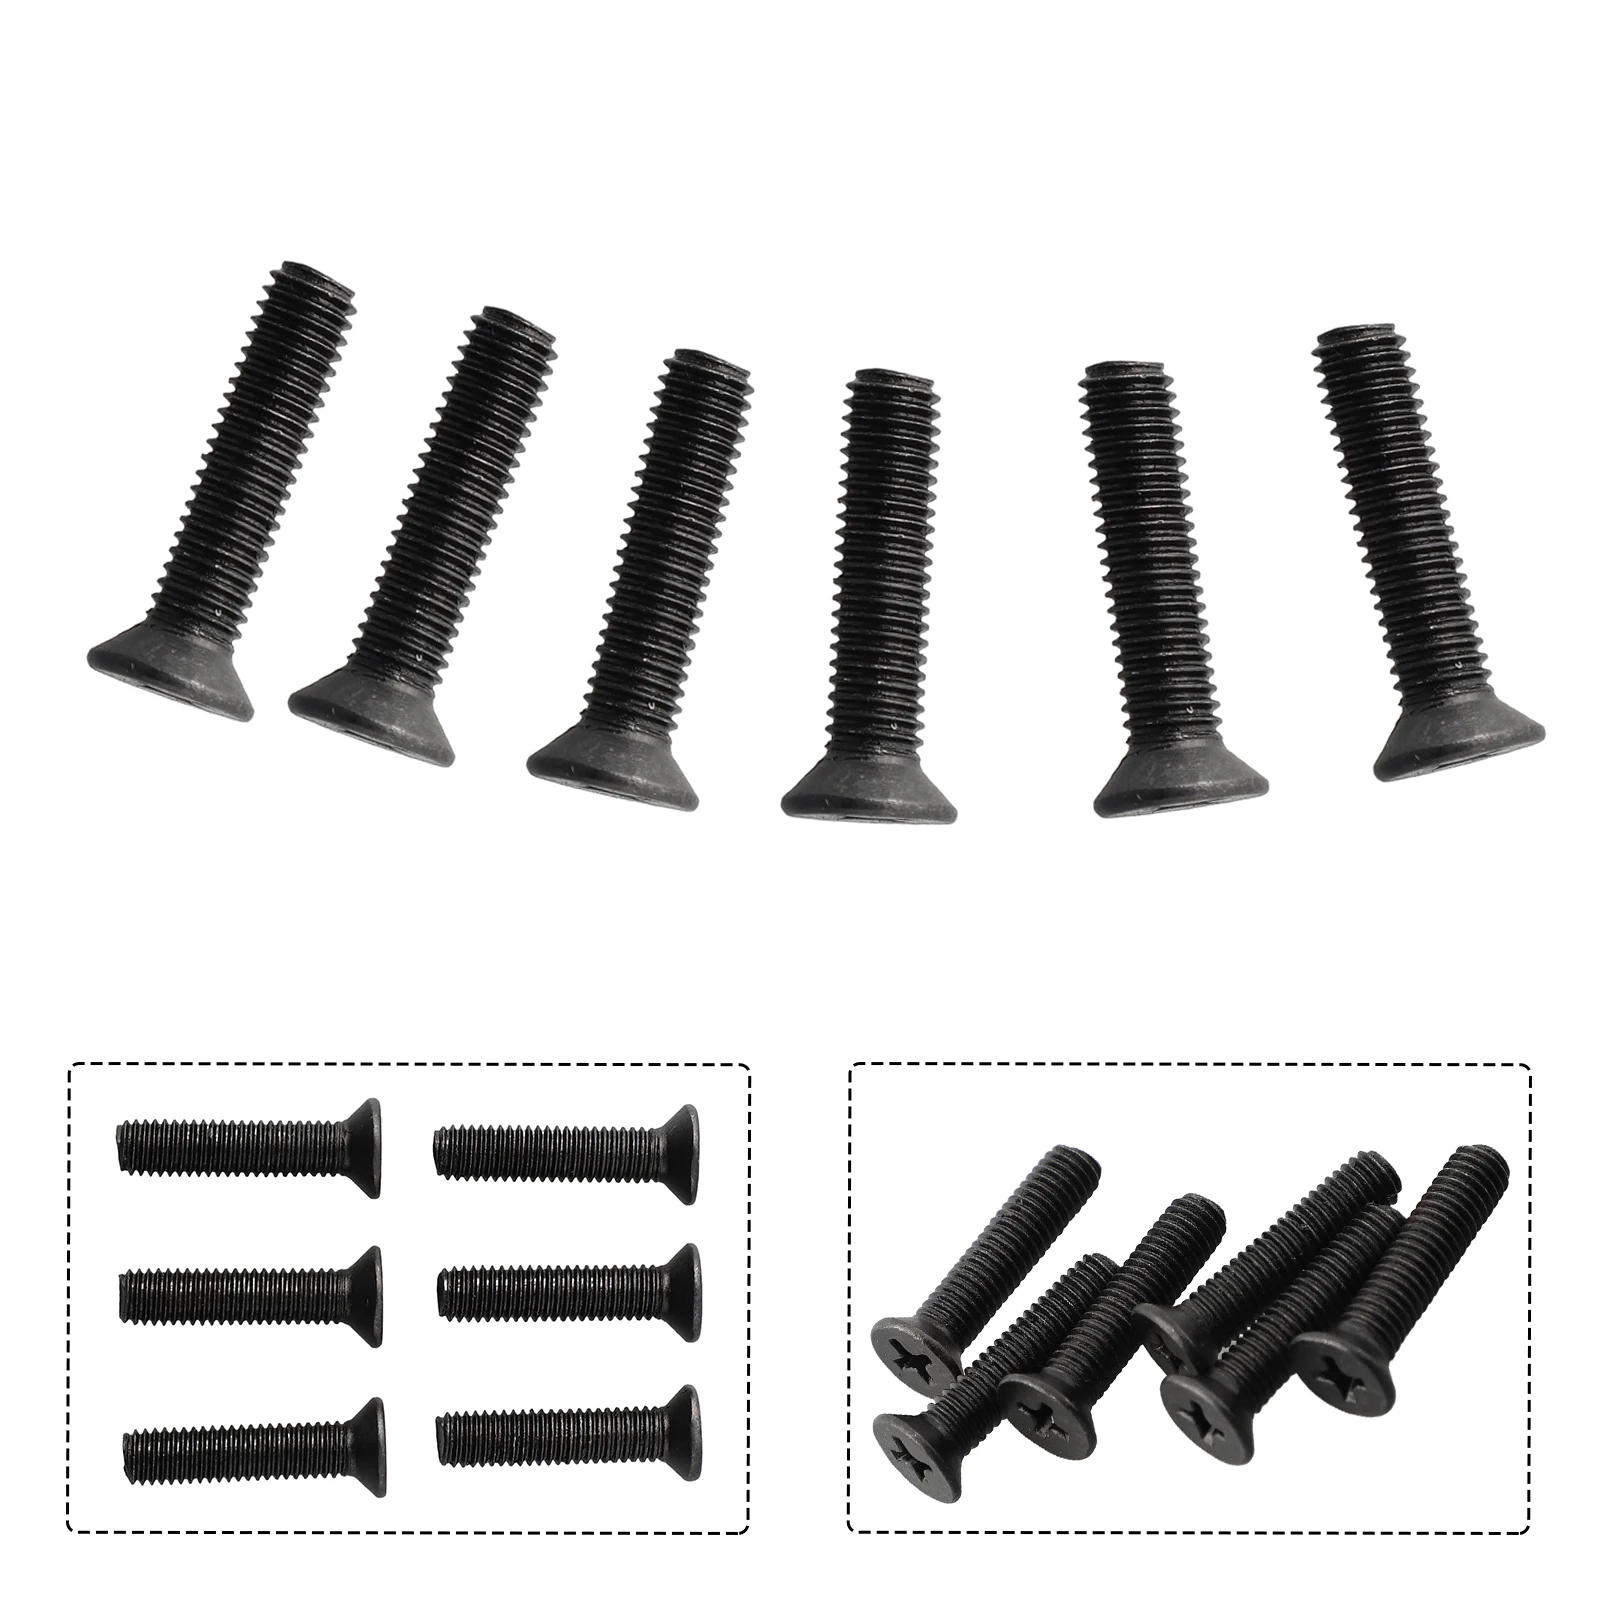 

2022 New Brand New Woodworking Fixing Screw Tool Part Tool Replacement Shank Workshop Equipment 6pcs Accessories